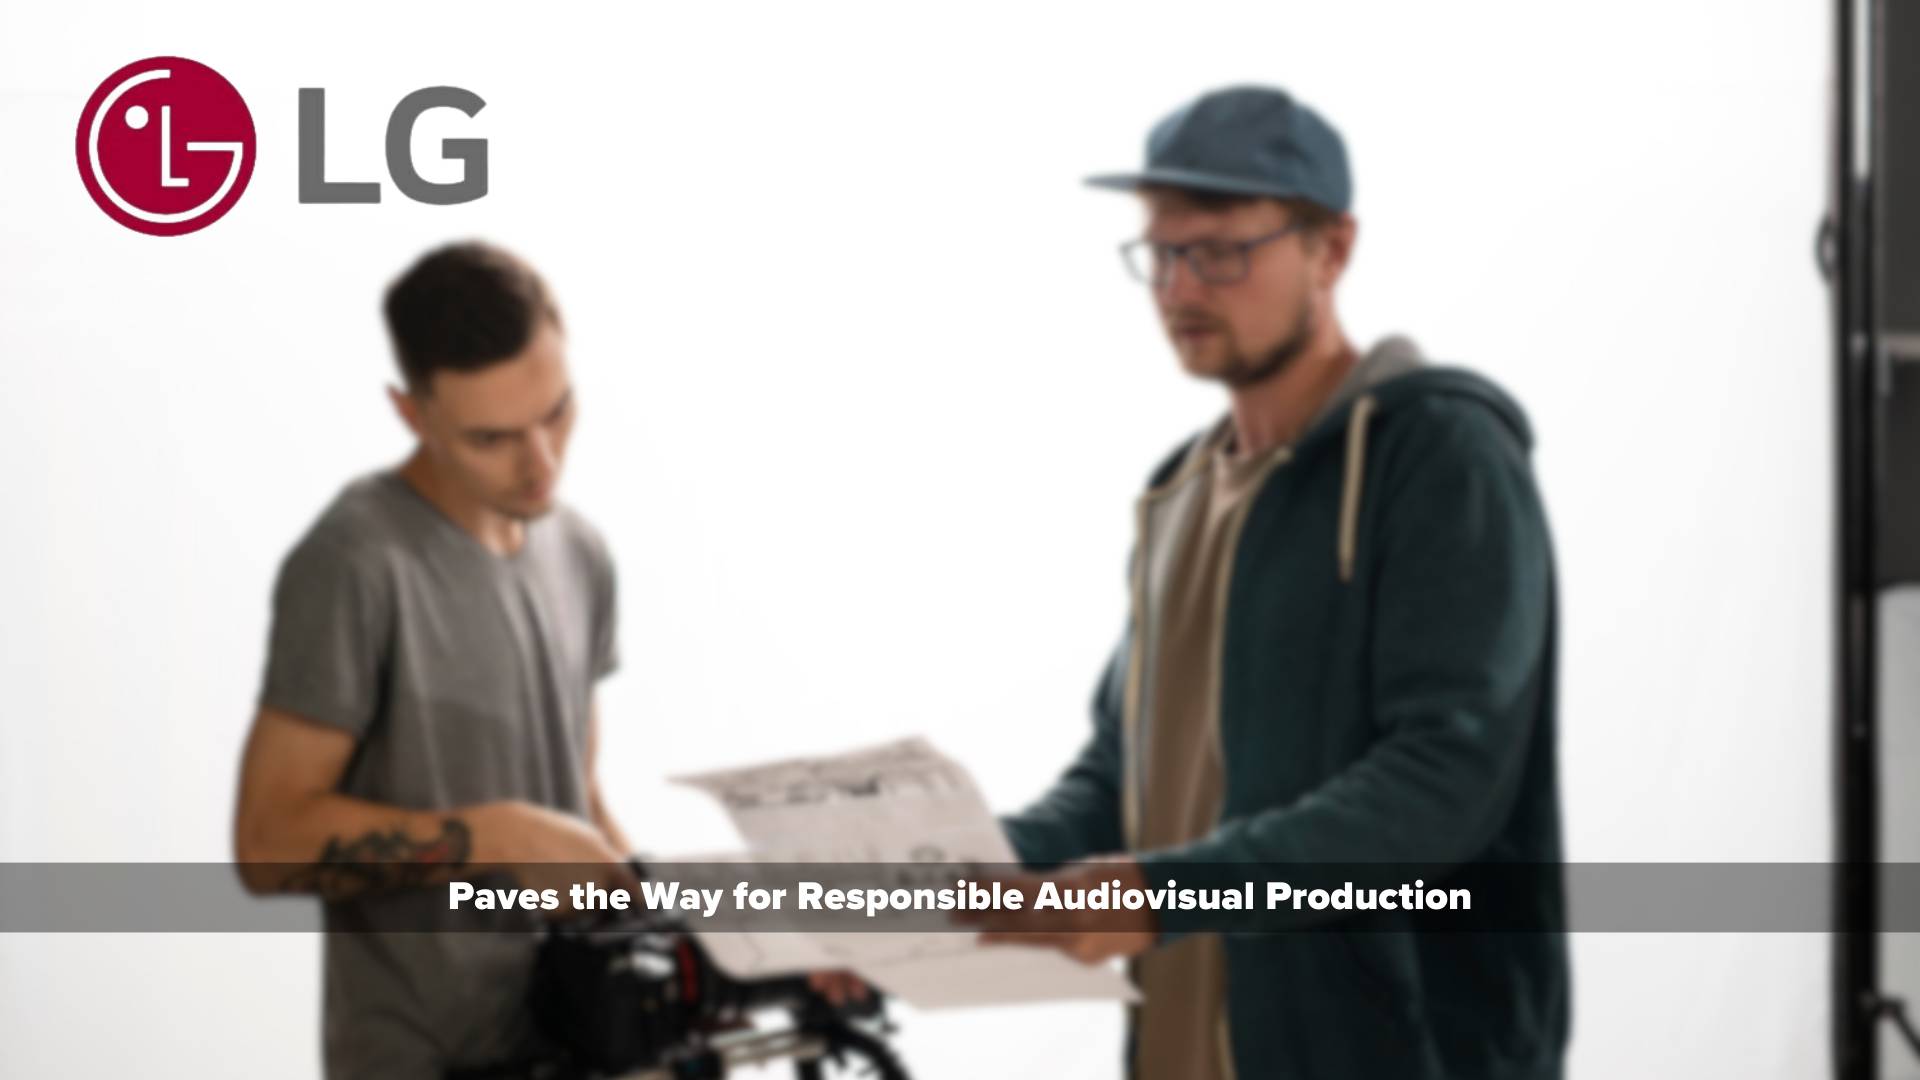 LG paves the way for responsible audiovisual production 